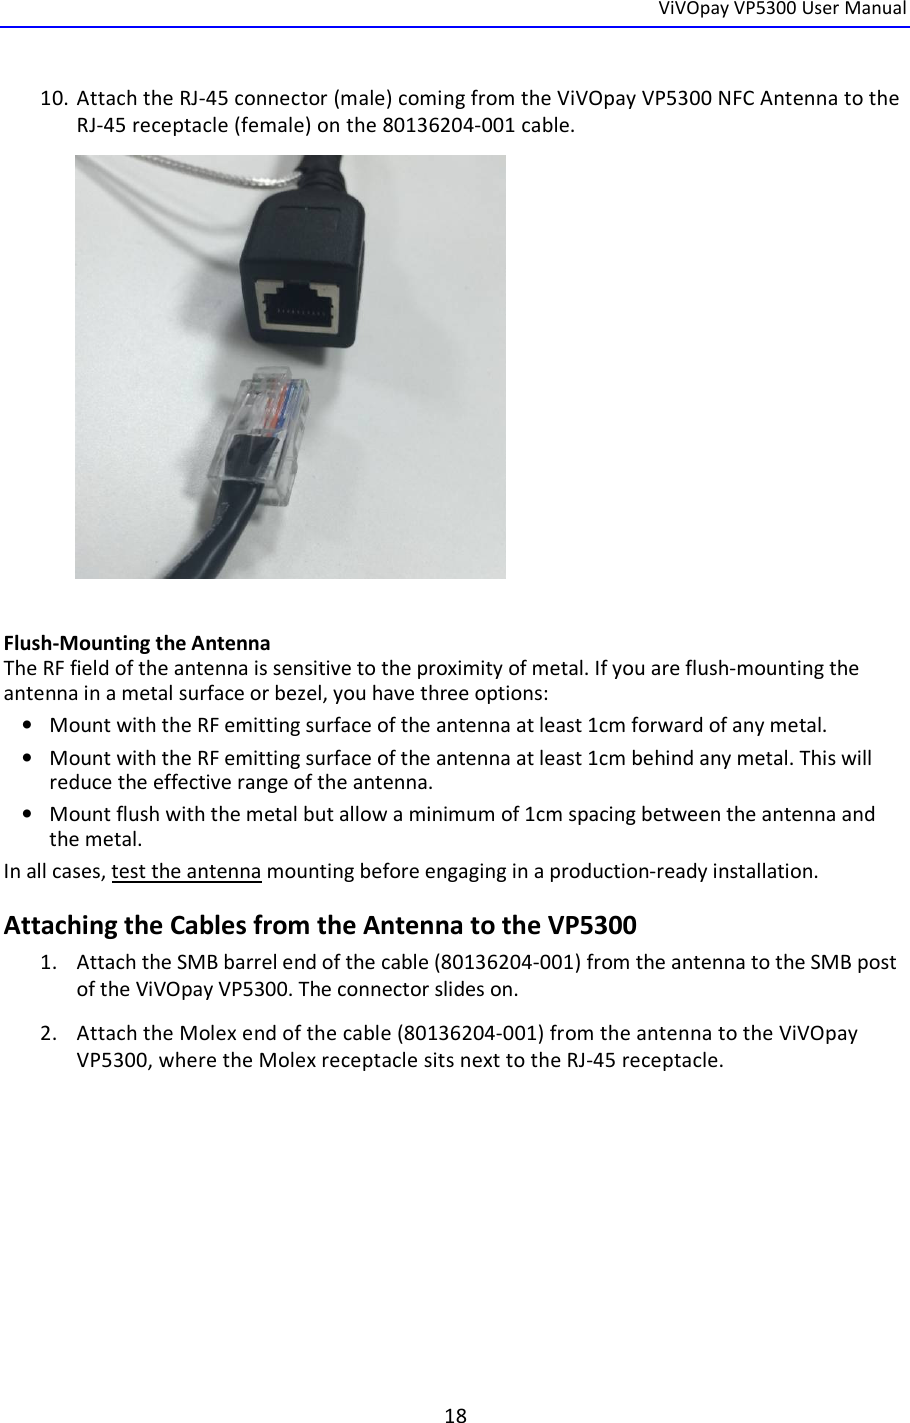  ViVOpay VP5300 User Manual   18  10. Attach the RJ-45 connector (male) coming from the ViVOpay VP5300 NFC Antenna to the RJ-45 receptacle (female) on the 80136204-001 cable.            Flush-Mounting the Antenna The RF field of the antenna is sensitive to the proximity of metal. If you are flush-mounting the antenna in a metal surface or bezel, you have three options: • Mount with the RF emitting surface of the antenna at least 1cm forward of any metal. • Mount with the RF emitting surface of the antenna at least 1cm behind any metal. This will reduce the effective range of the antenna. • Mount flush with the metal but allow a minimum of 1cm spacing between the antenna and the metal. In all cases, test the antenna mounting before engaging in a production-ready installation.  Attaching the Cables from the Antenna to the VP5300 1. Attach the SMB barrel end of the cable (80136204-001) from the antenna to the SMB post of the ViVOpay VP5300. The connector slides on. 2. Attach the Molex end of the cable (80136204-001) from the antenna to the ViVOpay VP5300, where the Molex receptacle sits next to the RJ-45 receptacle.     